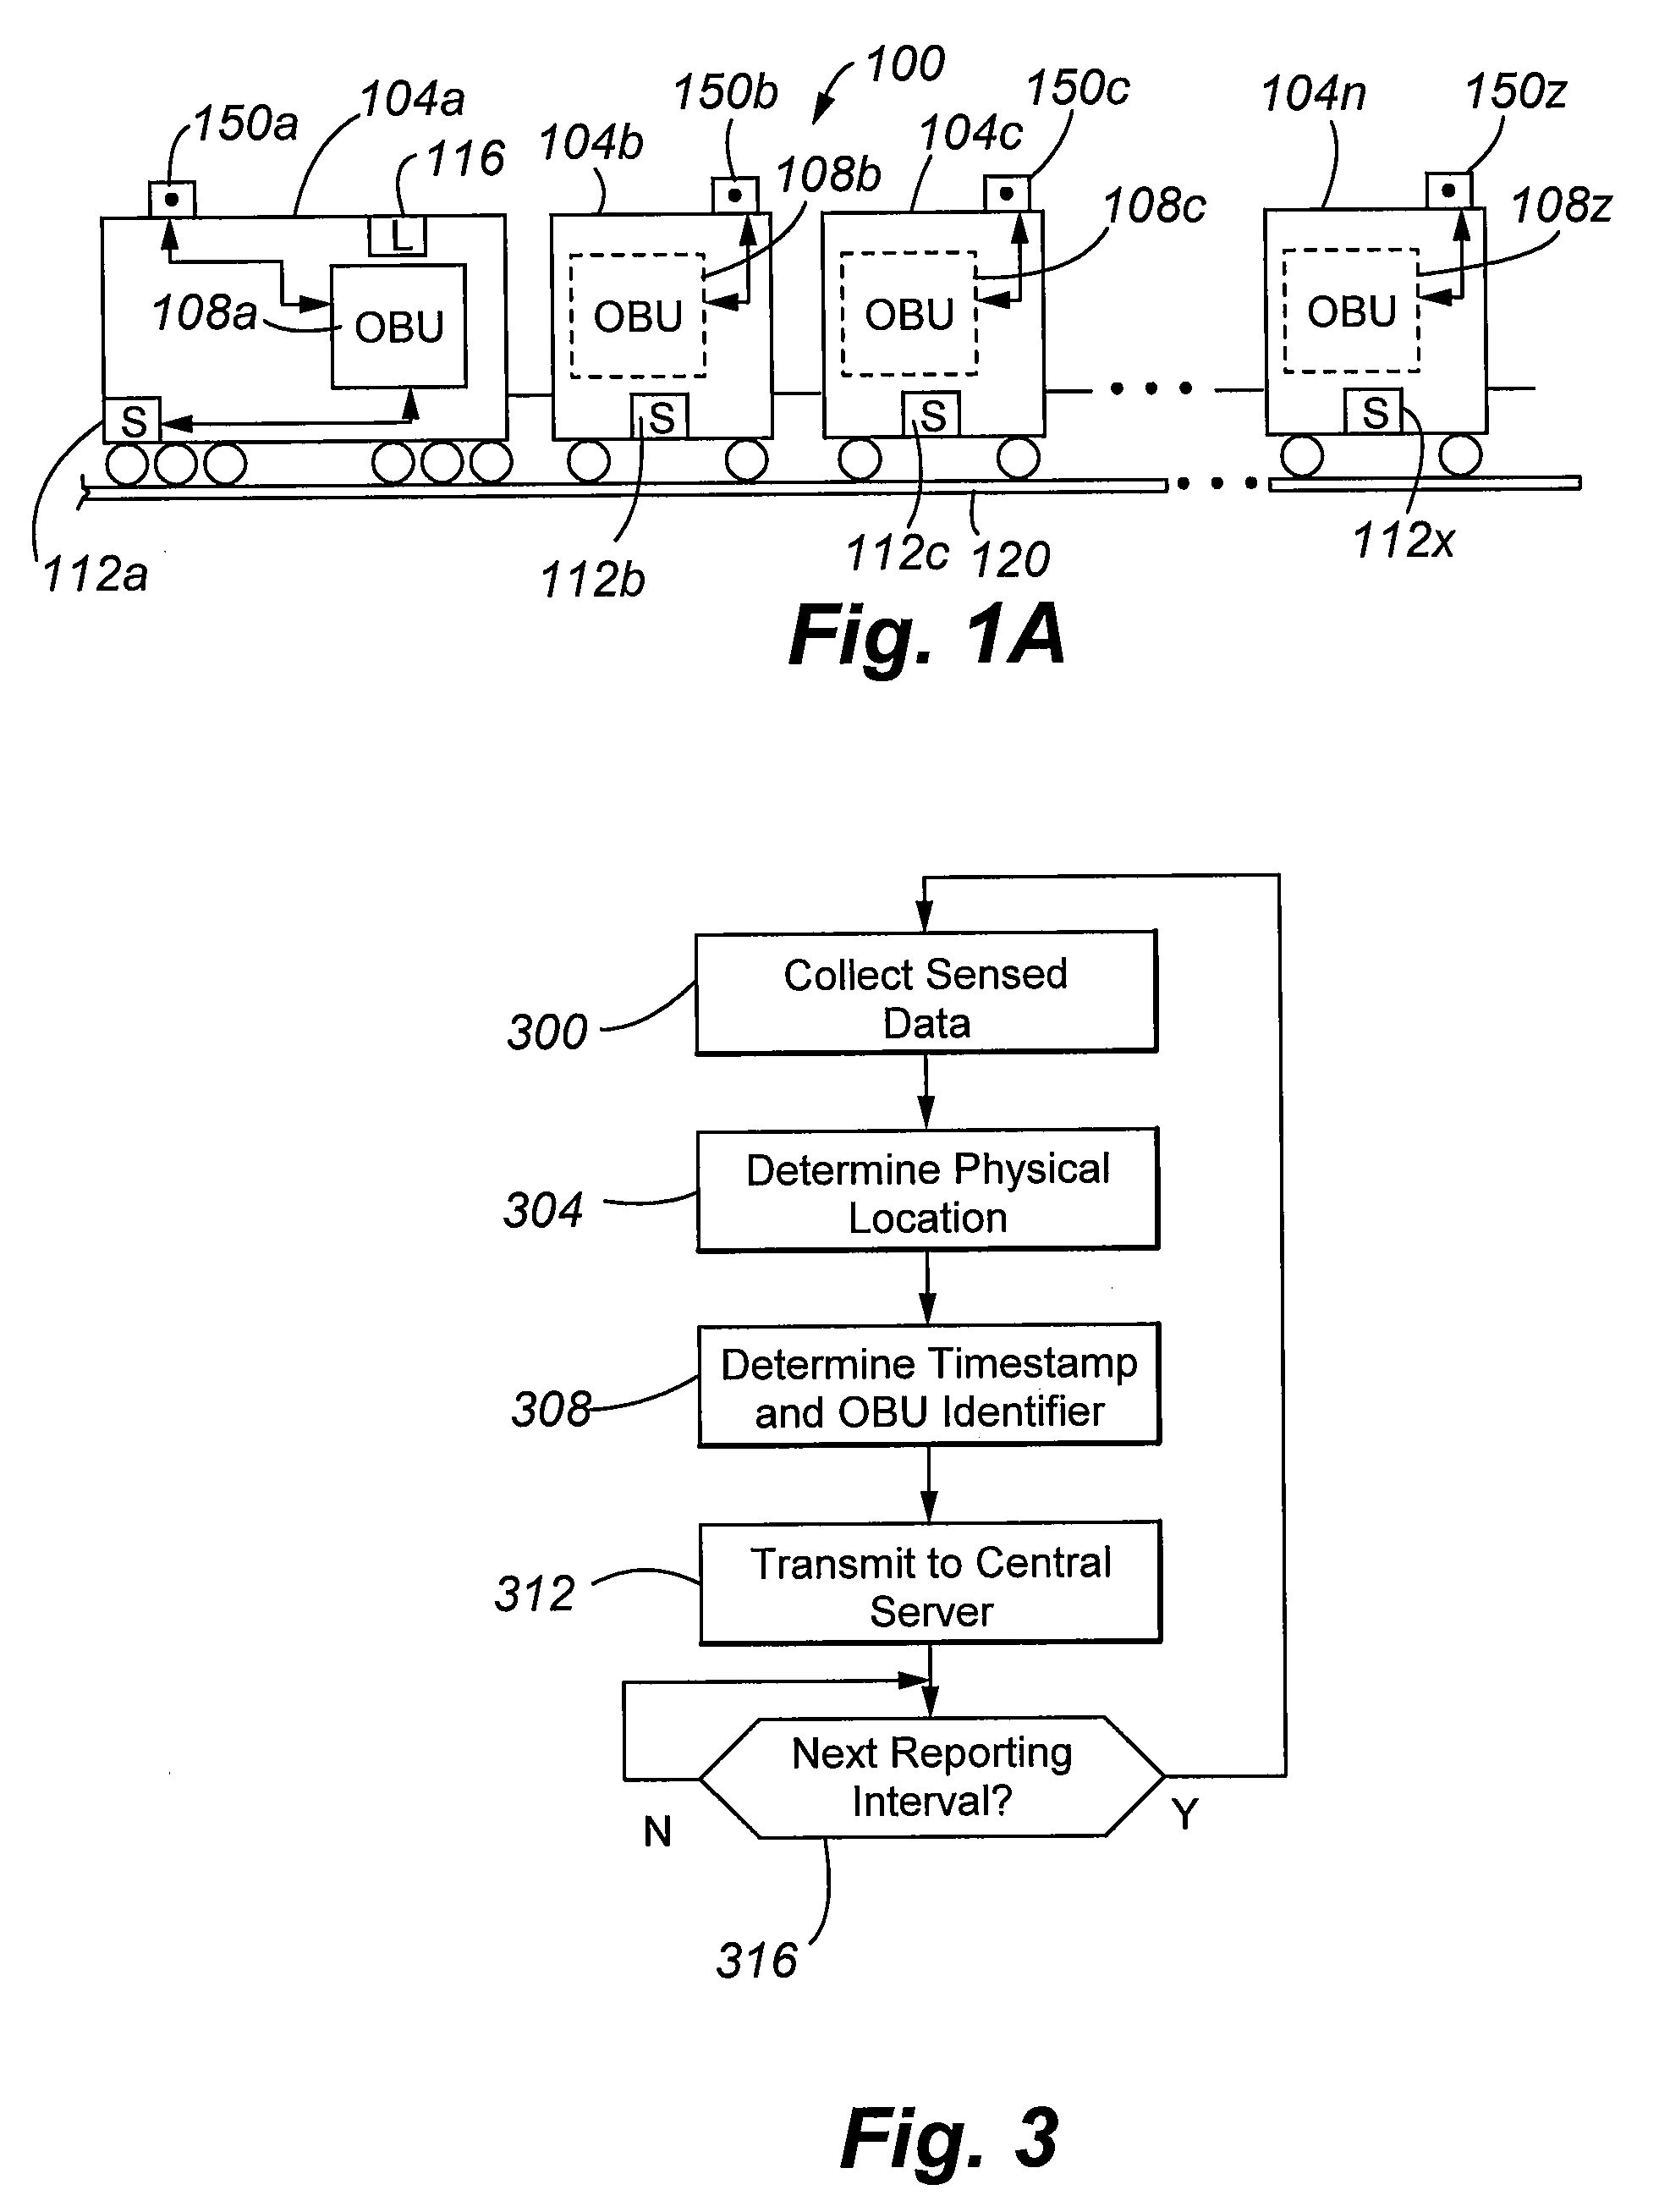 Integrated rail efficiency and safety support system